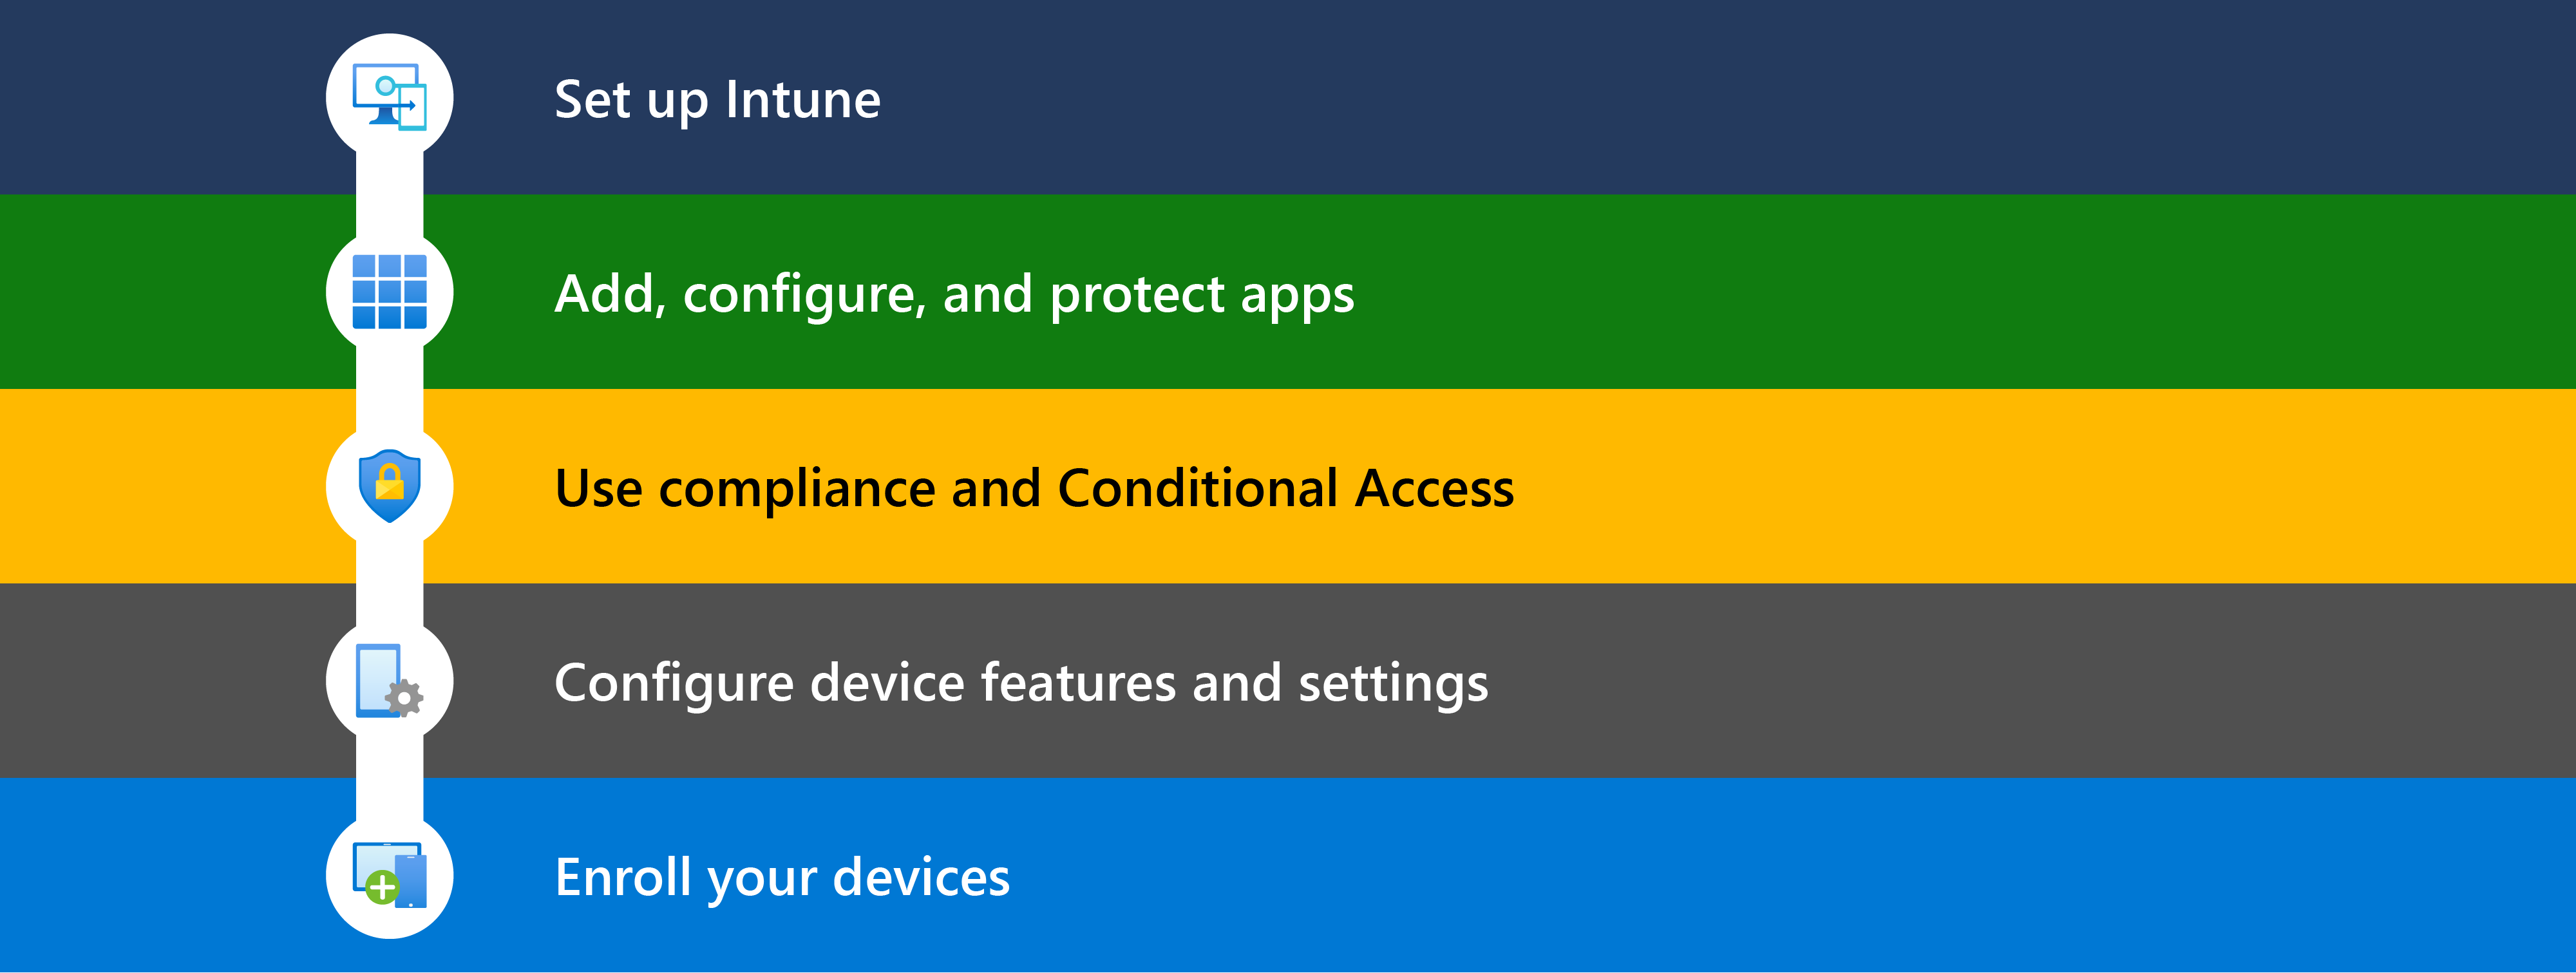 Diagram that shows the different steps to get started with Microsoft Intune, including set up, adding apps, using compliance & conditional access, configuring device features, and then enrolling devices to be managed.